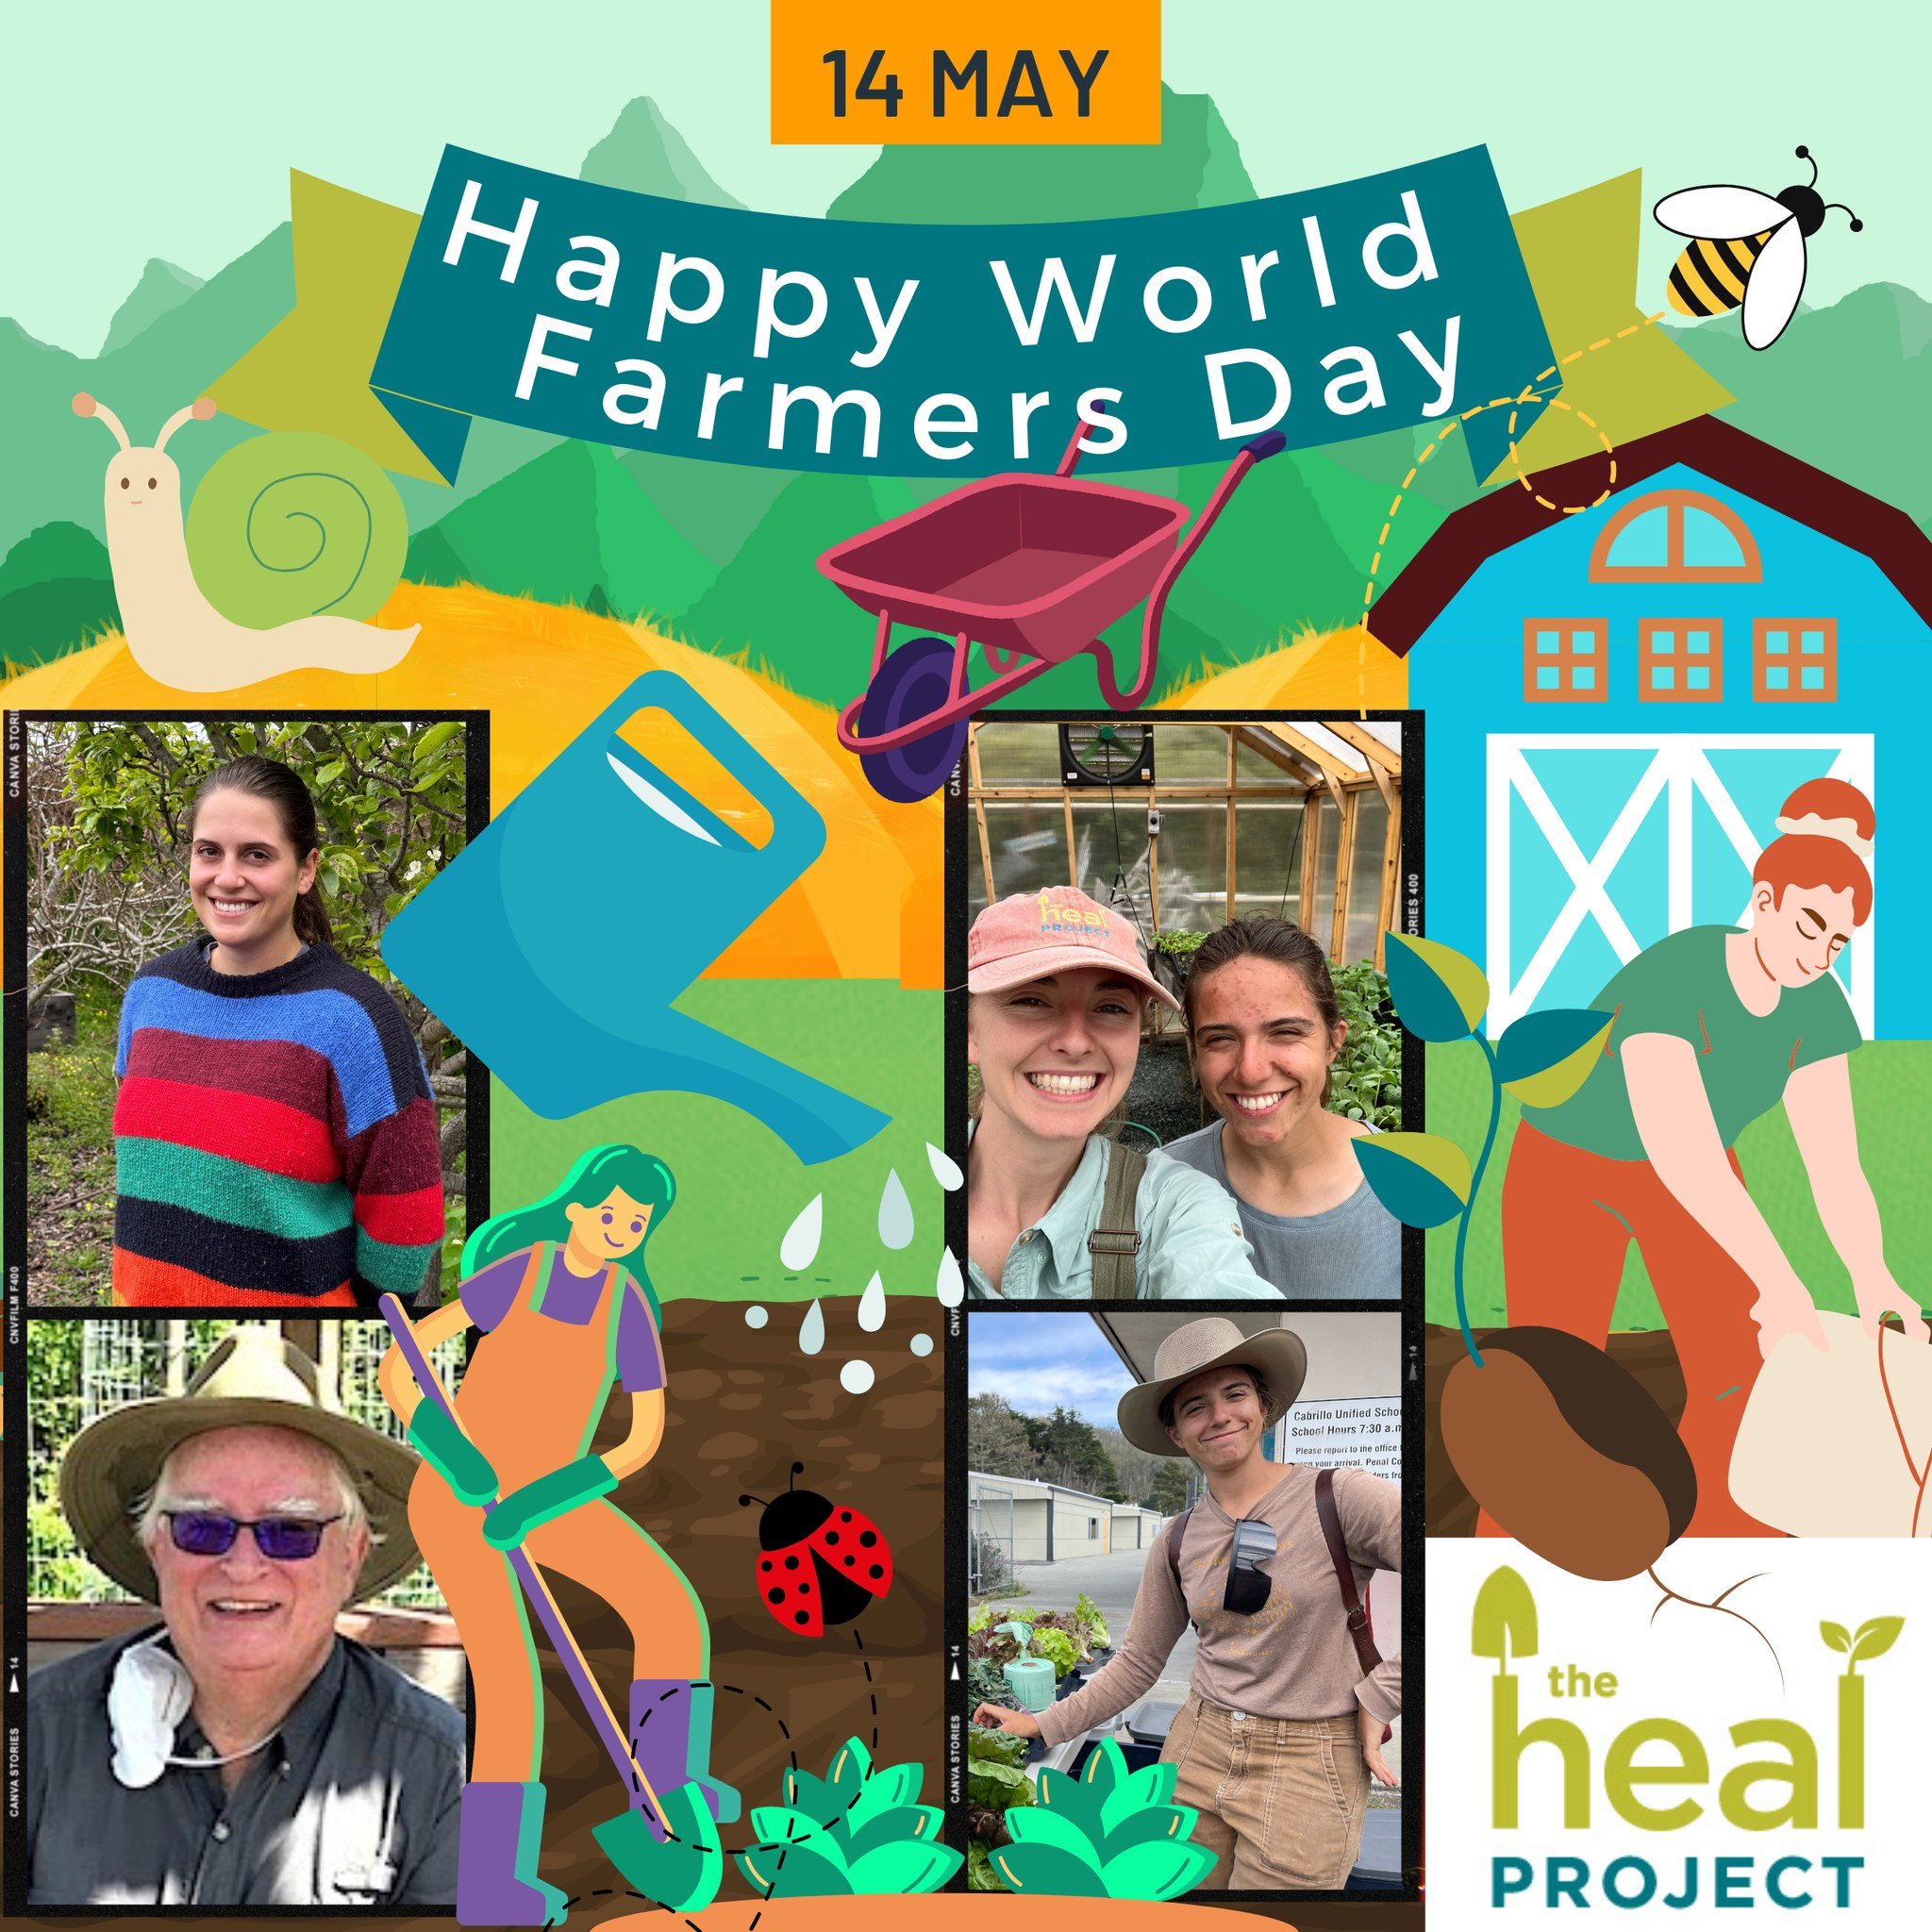 Today is World Farmers Day. It's a grand occasion to salute our farmers and farm assistants on the San Mateo County School Farm -- the people who take care of the land and plants so that The HEAL Project students can enjoy the farm and understand how